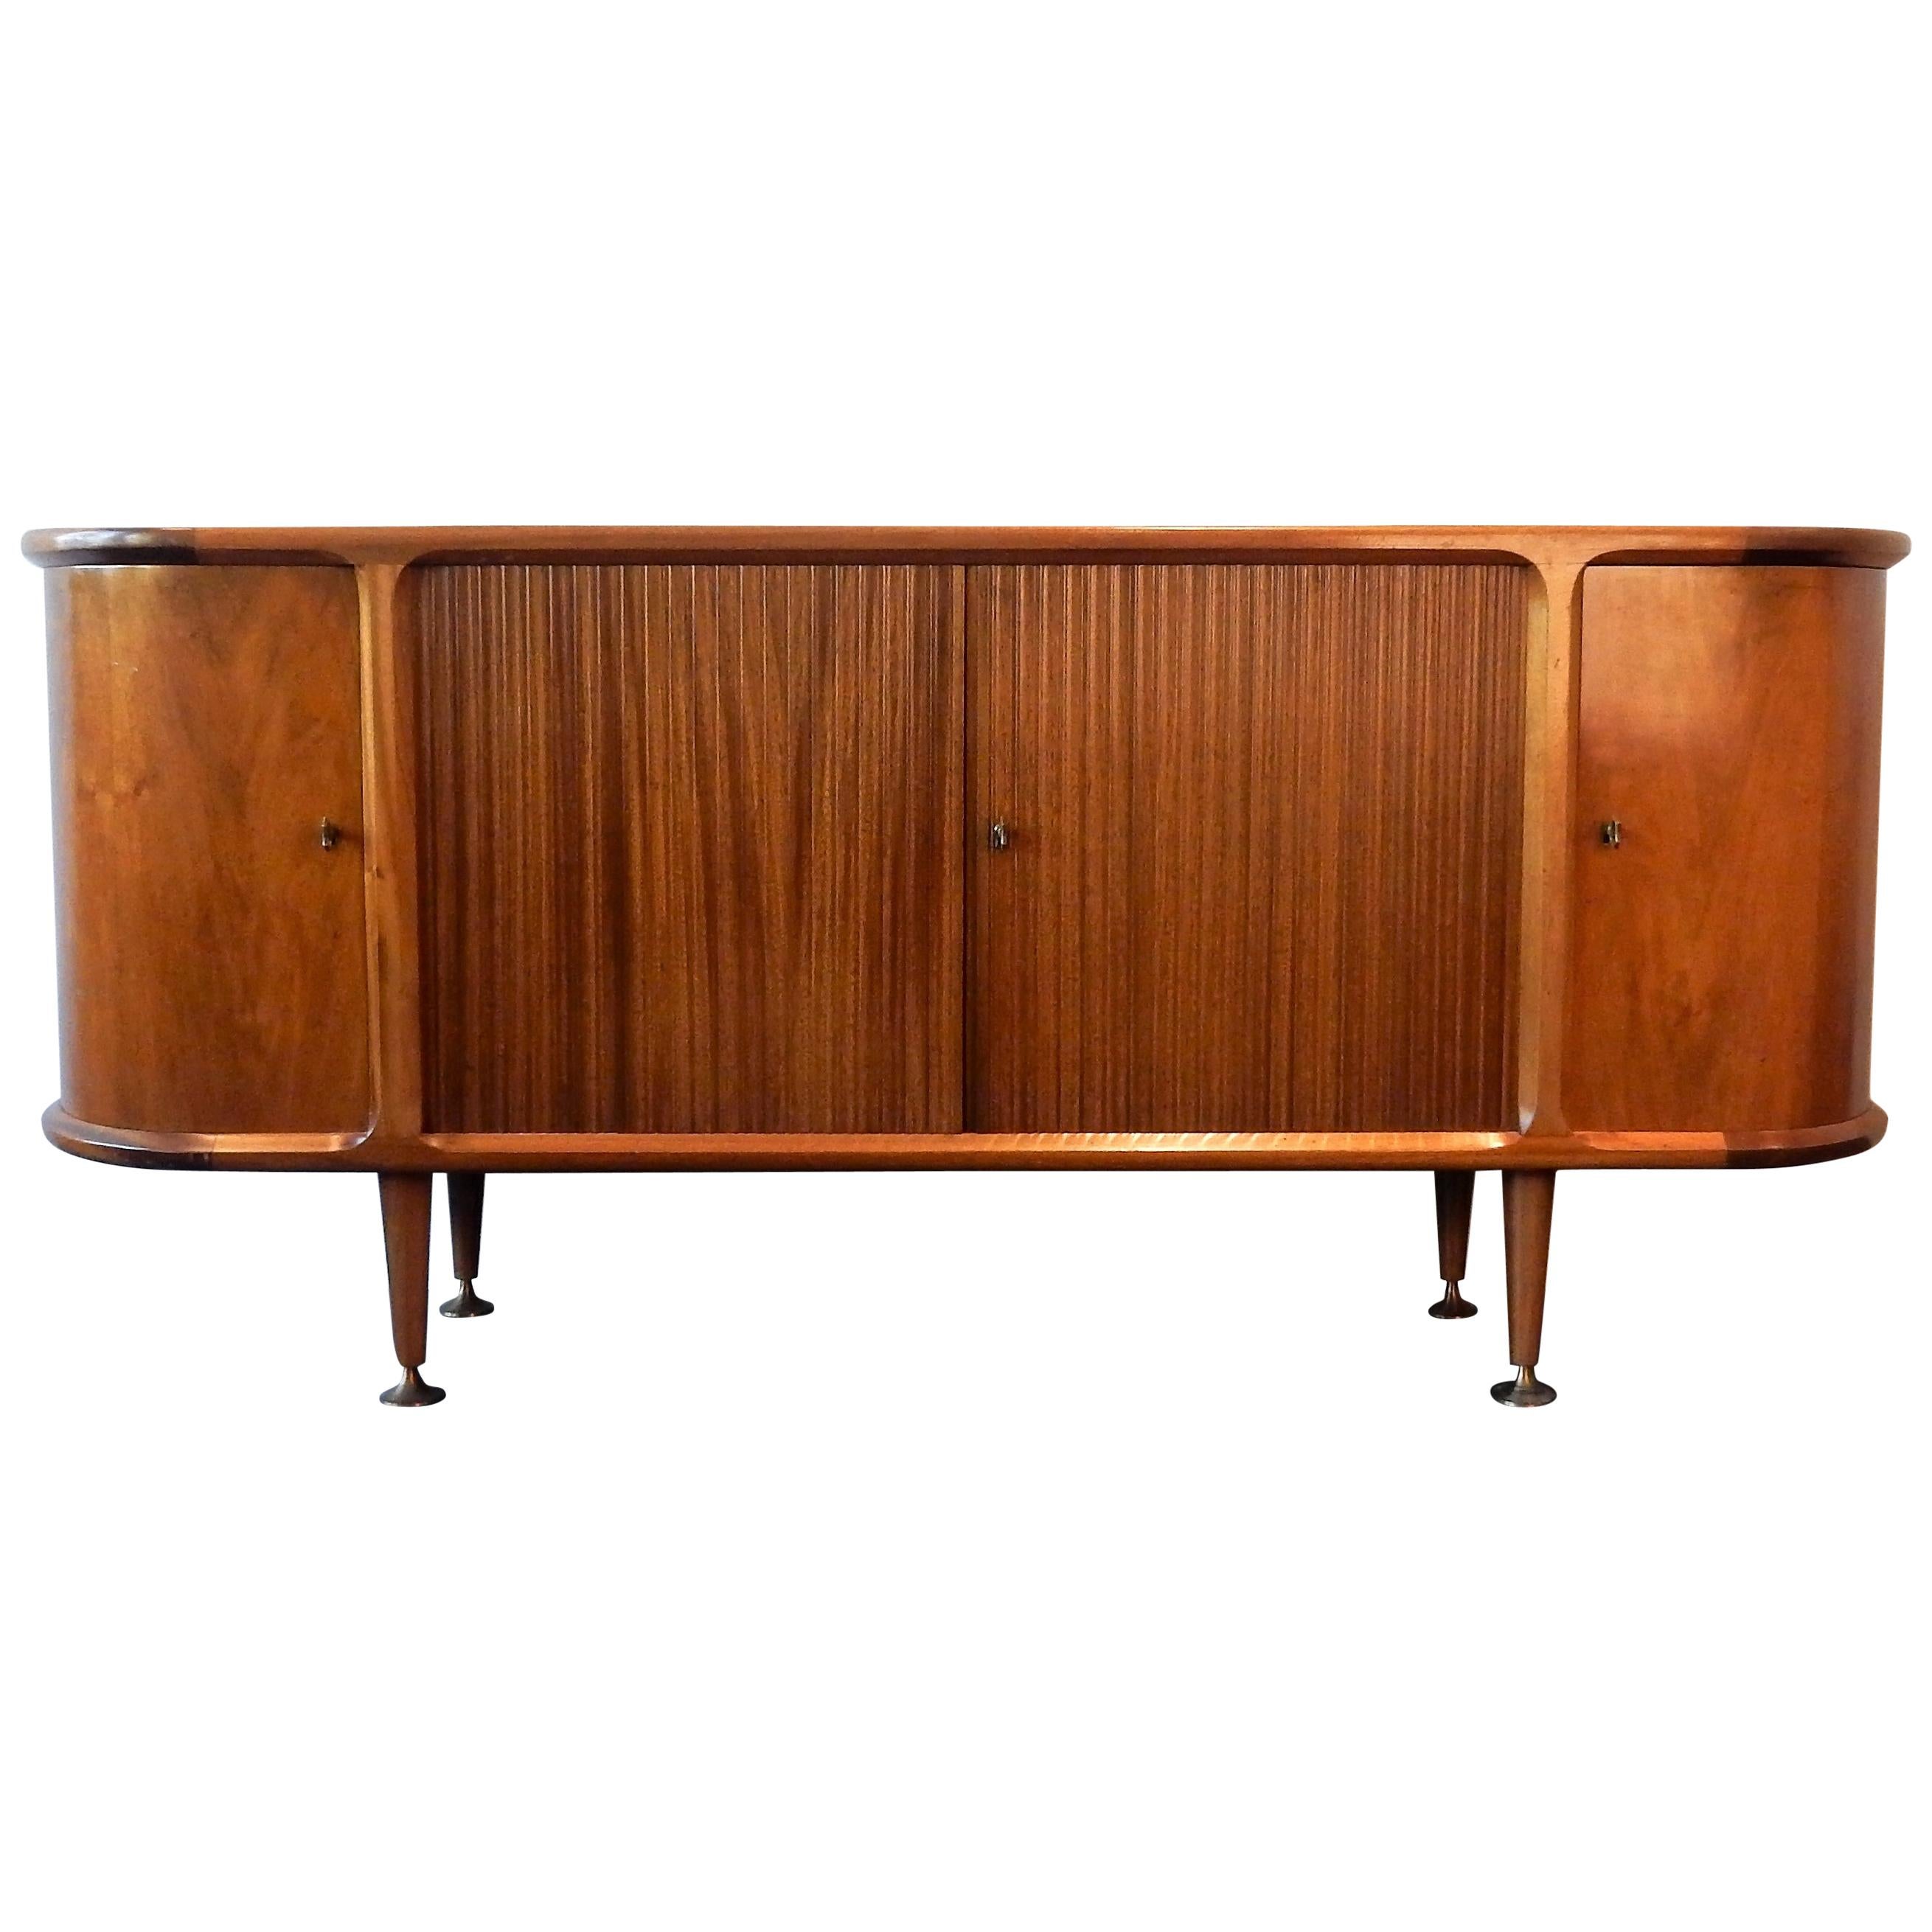 'Poly-Z' sideboard by A.A. Patijn for Zijlstra Joure, The Netherlands, 1950s